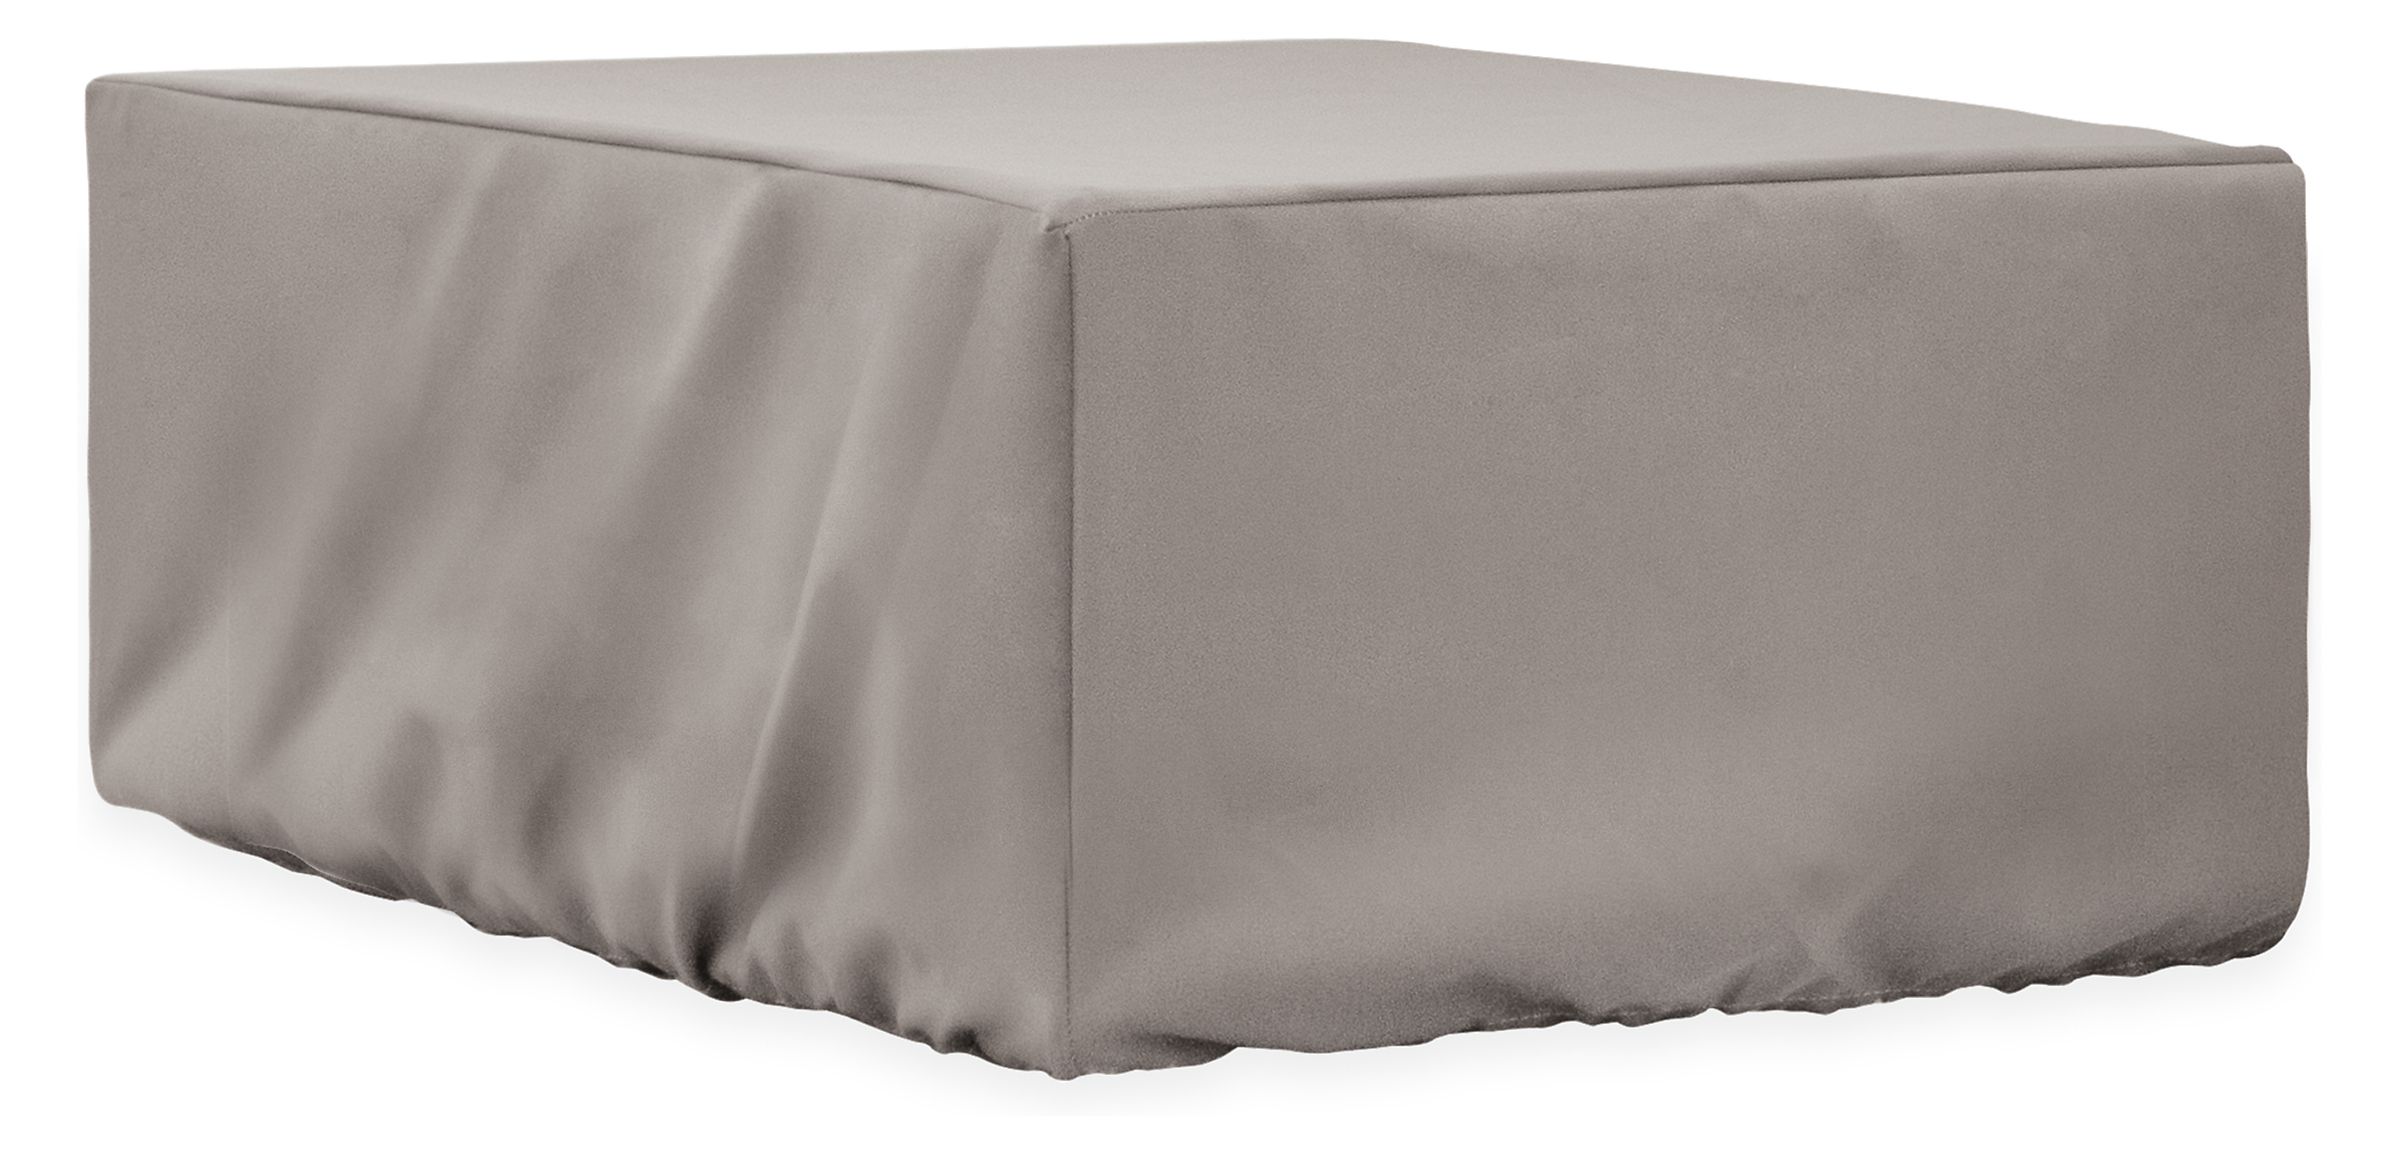 Outdoor Cover for Table/Ottoman 22w 22d 18h with Drawstring